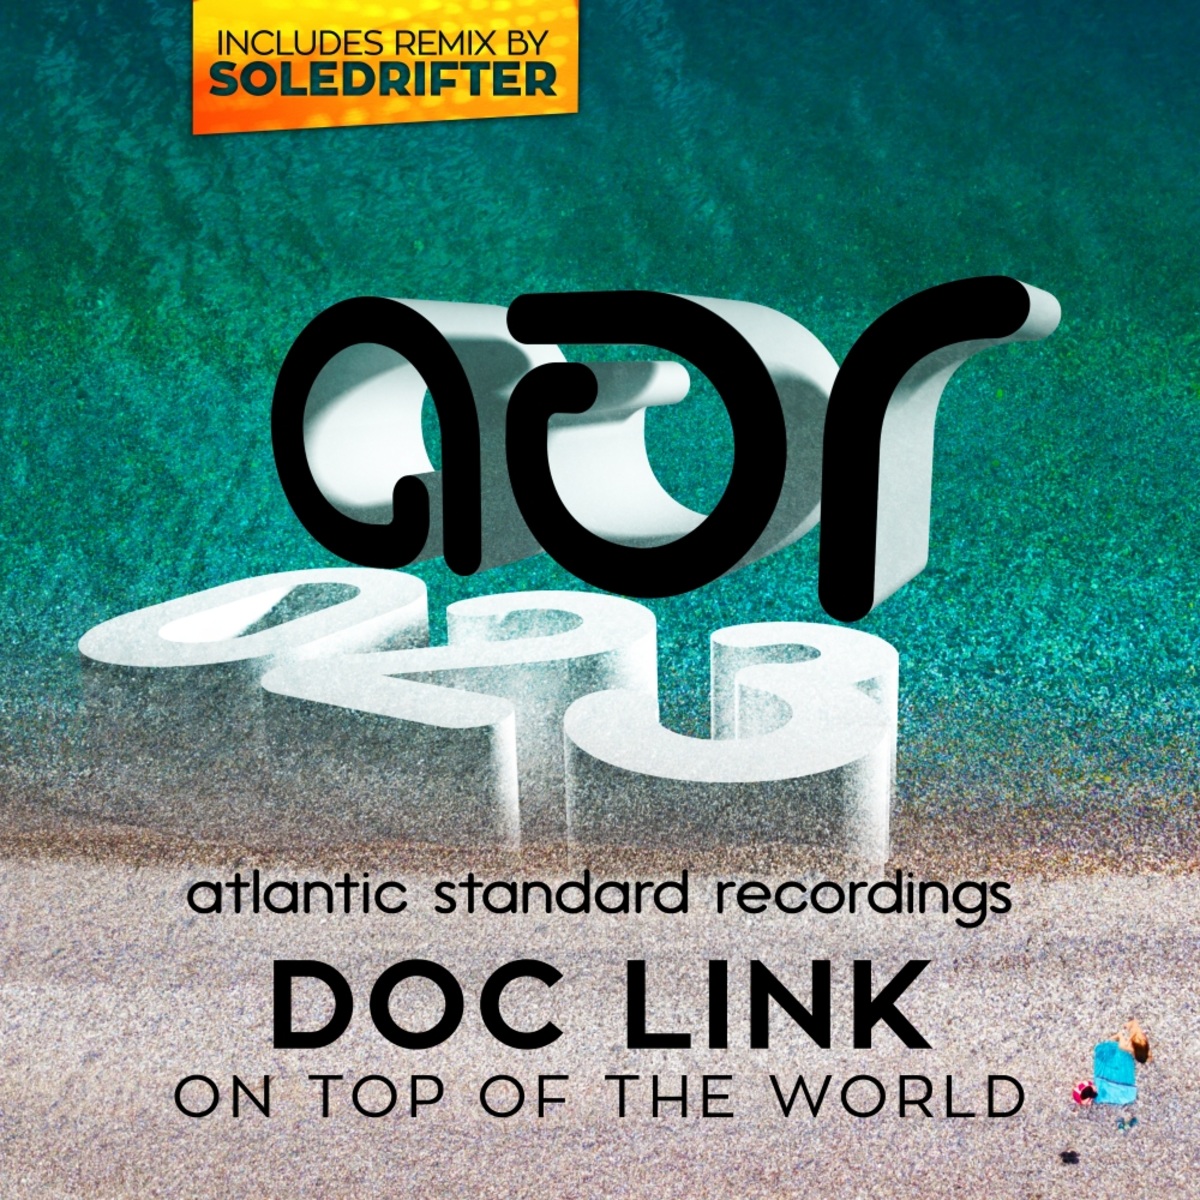 Doc Link - On Top Of The World / Atlantic Standard Recordings Inc.